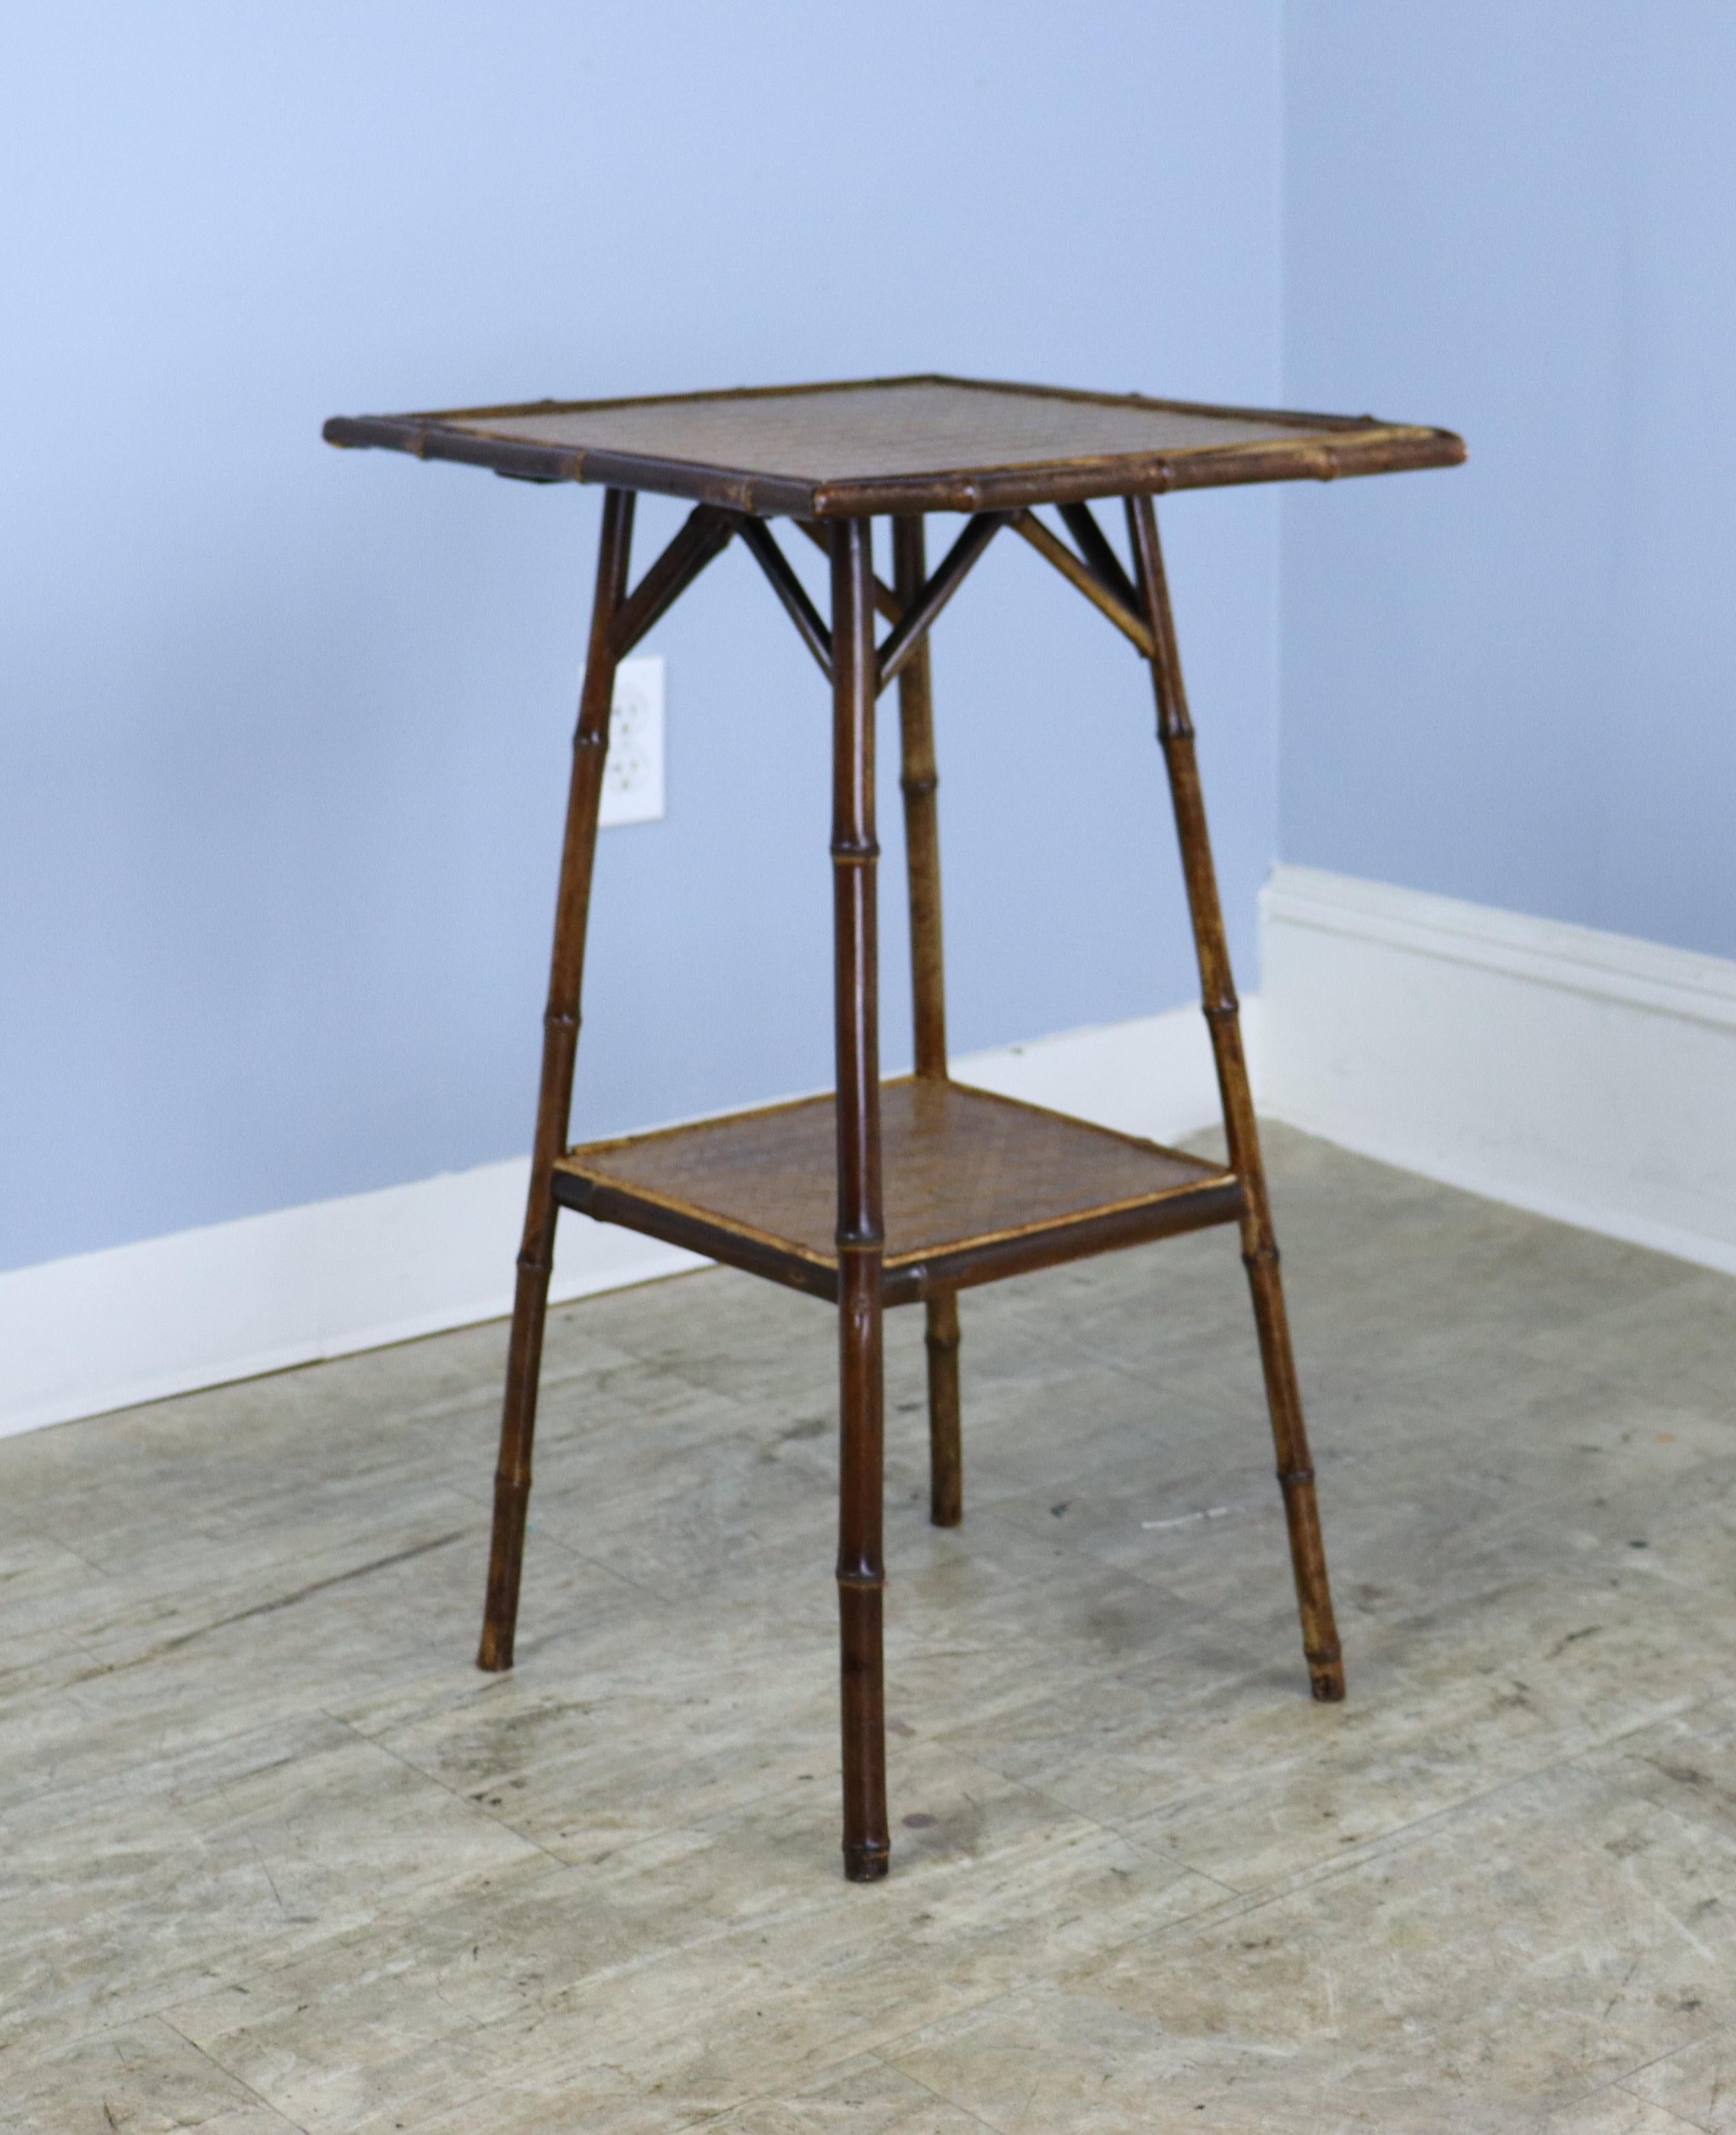 A charming bamboo side table with square top and lower shelf made of rattan in very good condition. Sturdy, and the bamboo is vibrantly colored and well constructed.